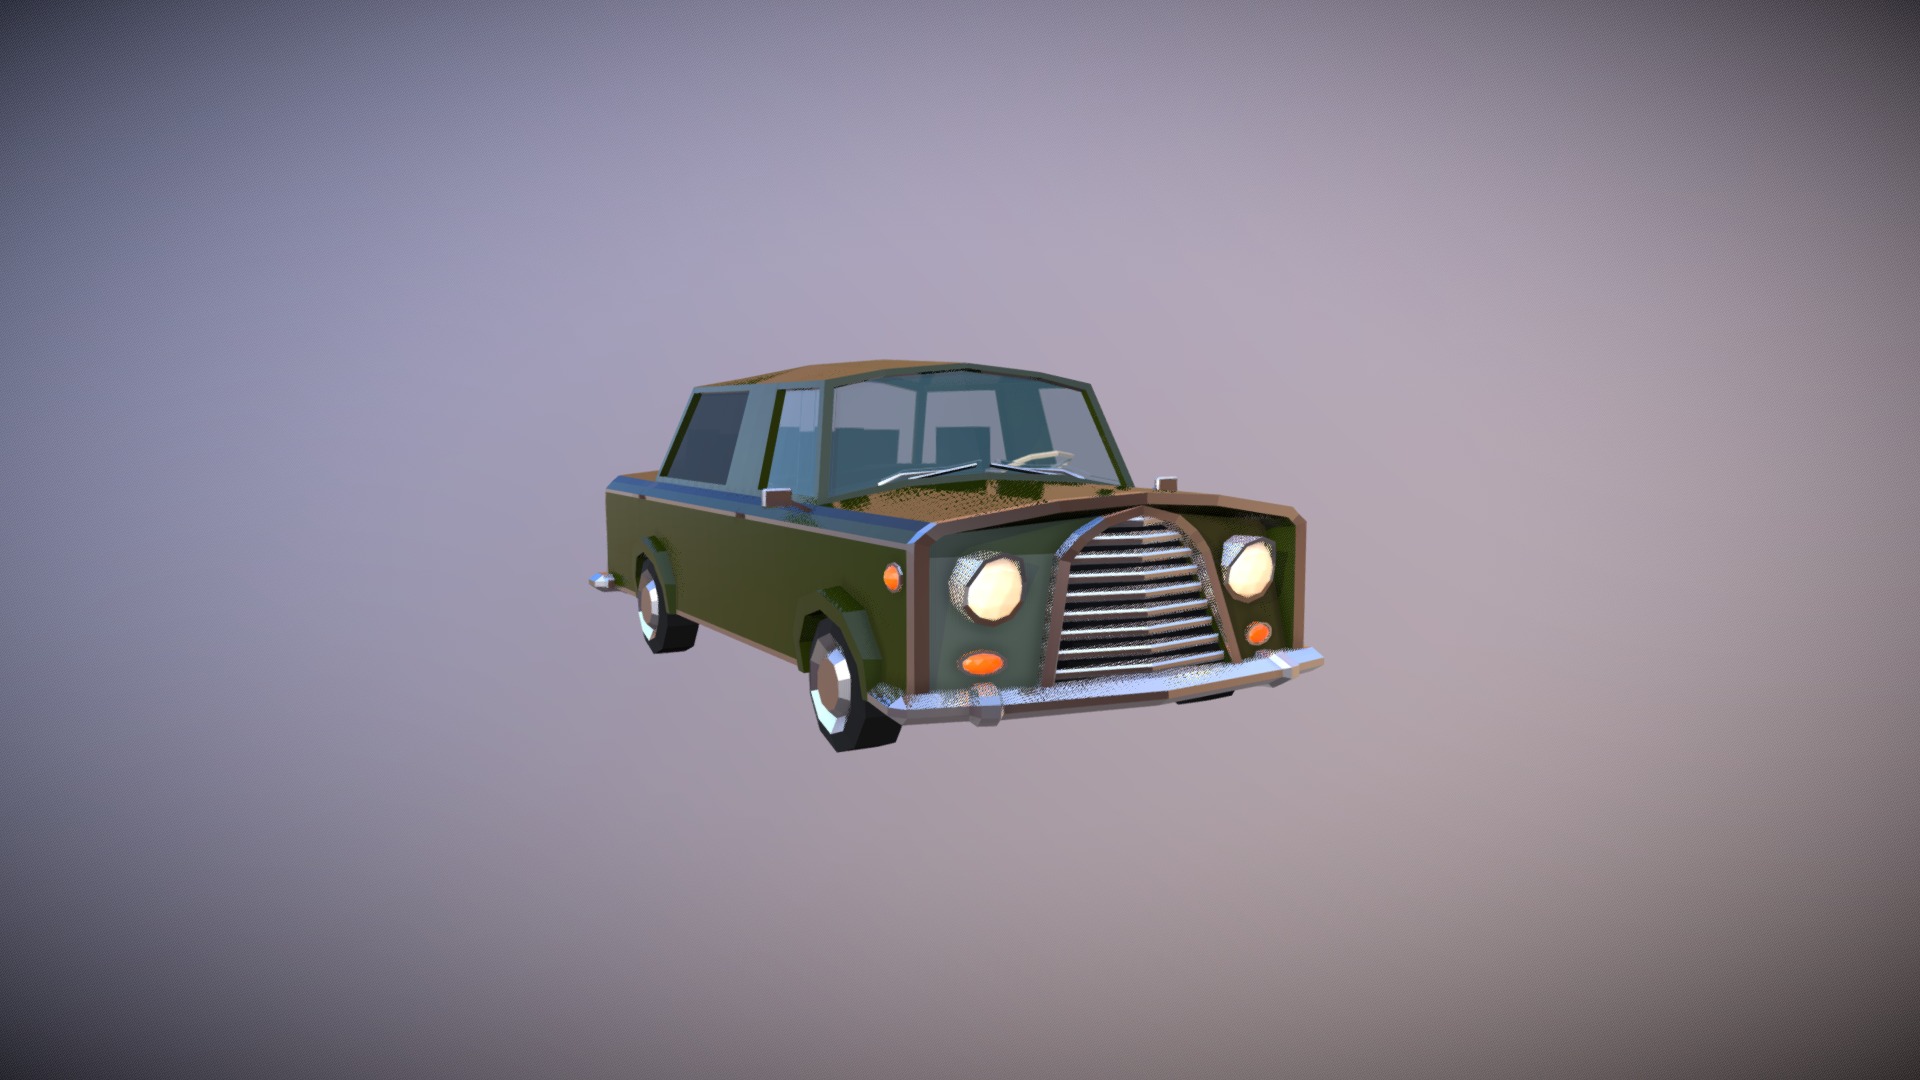 3D model Low Poly Limousine - This is a 3D model of the Low Poly Limousine. The 3D model is about a green car with lights.